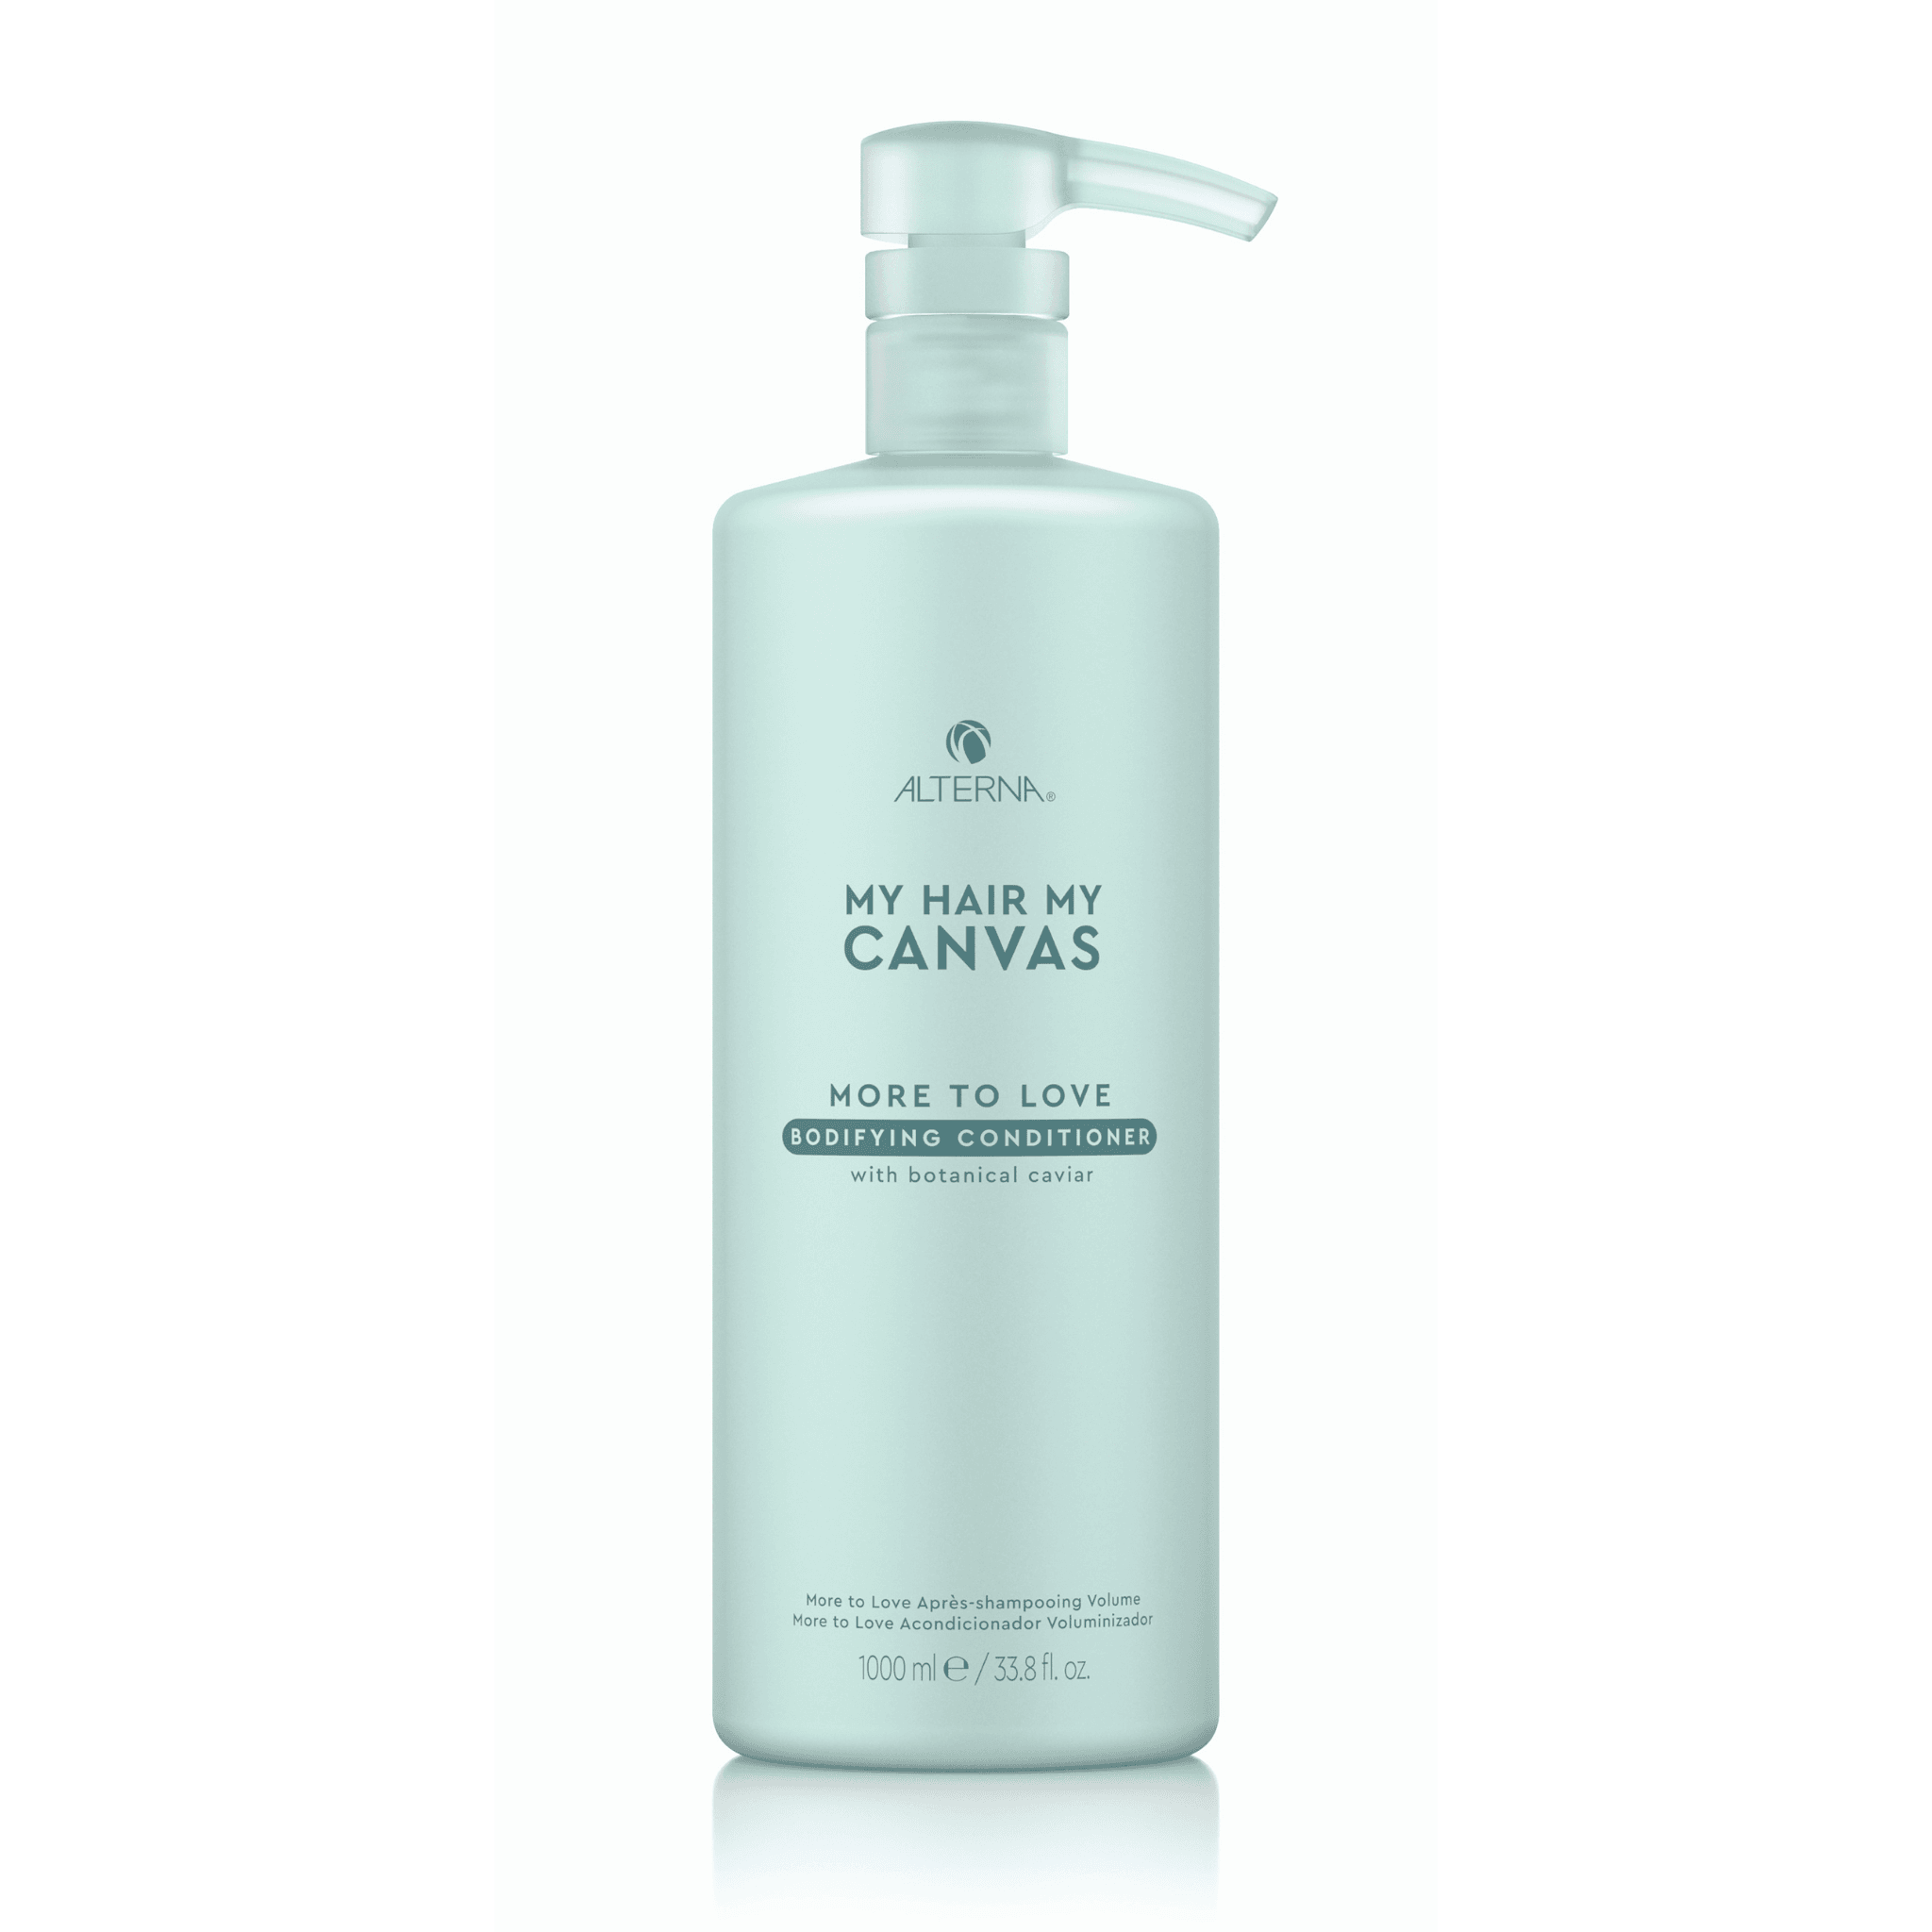 Alterna. My Hair My Canvas Revitalisant Volume More To Love - 1000 ml - Concept C. Shop